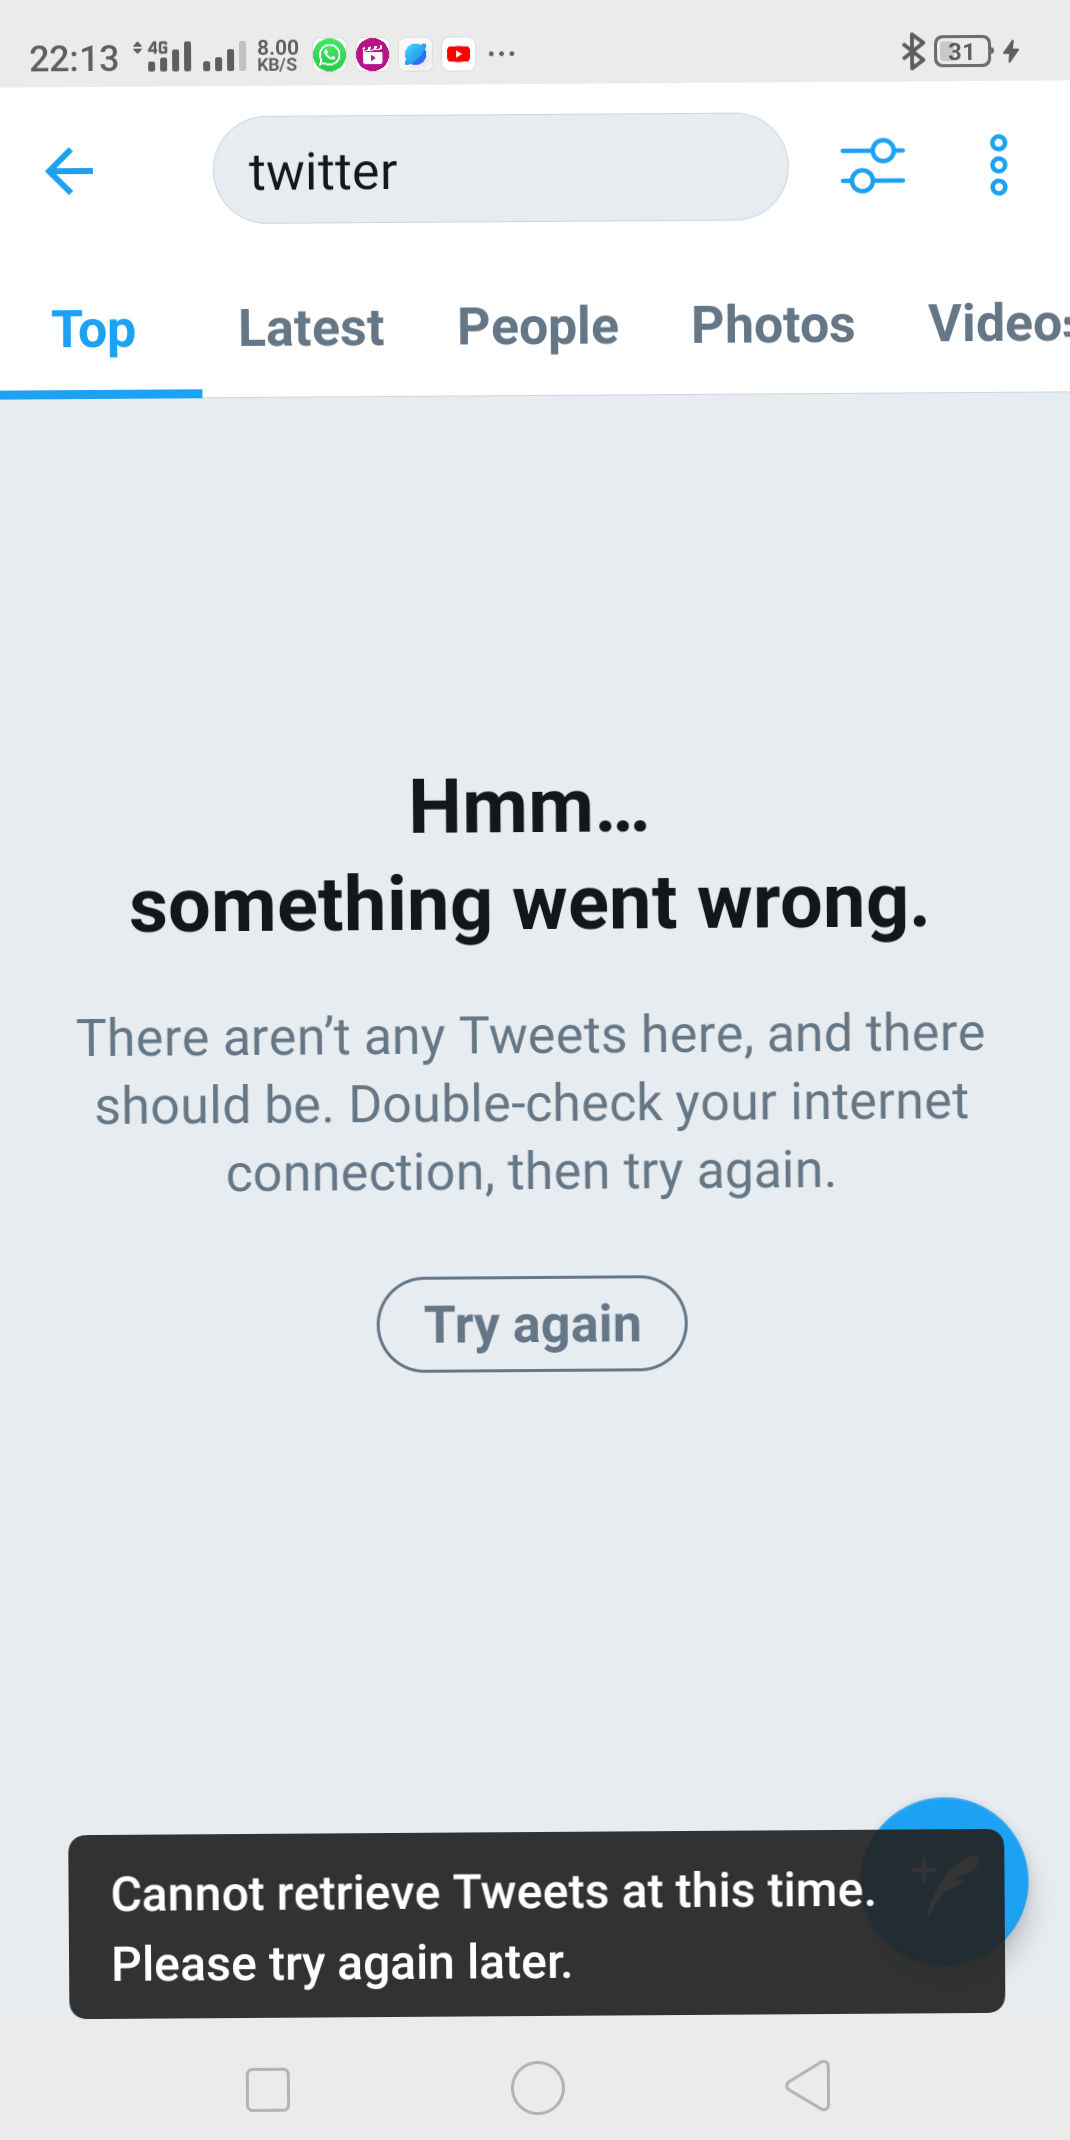 How to fix the “Cannot retrieve Tweets at this time. Please try again later” error on Twitter